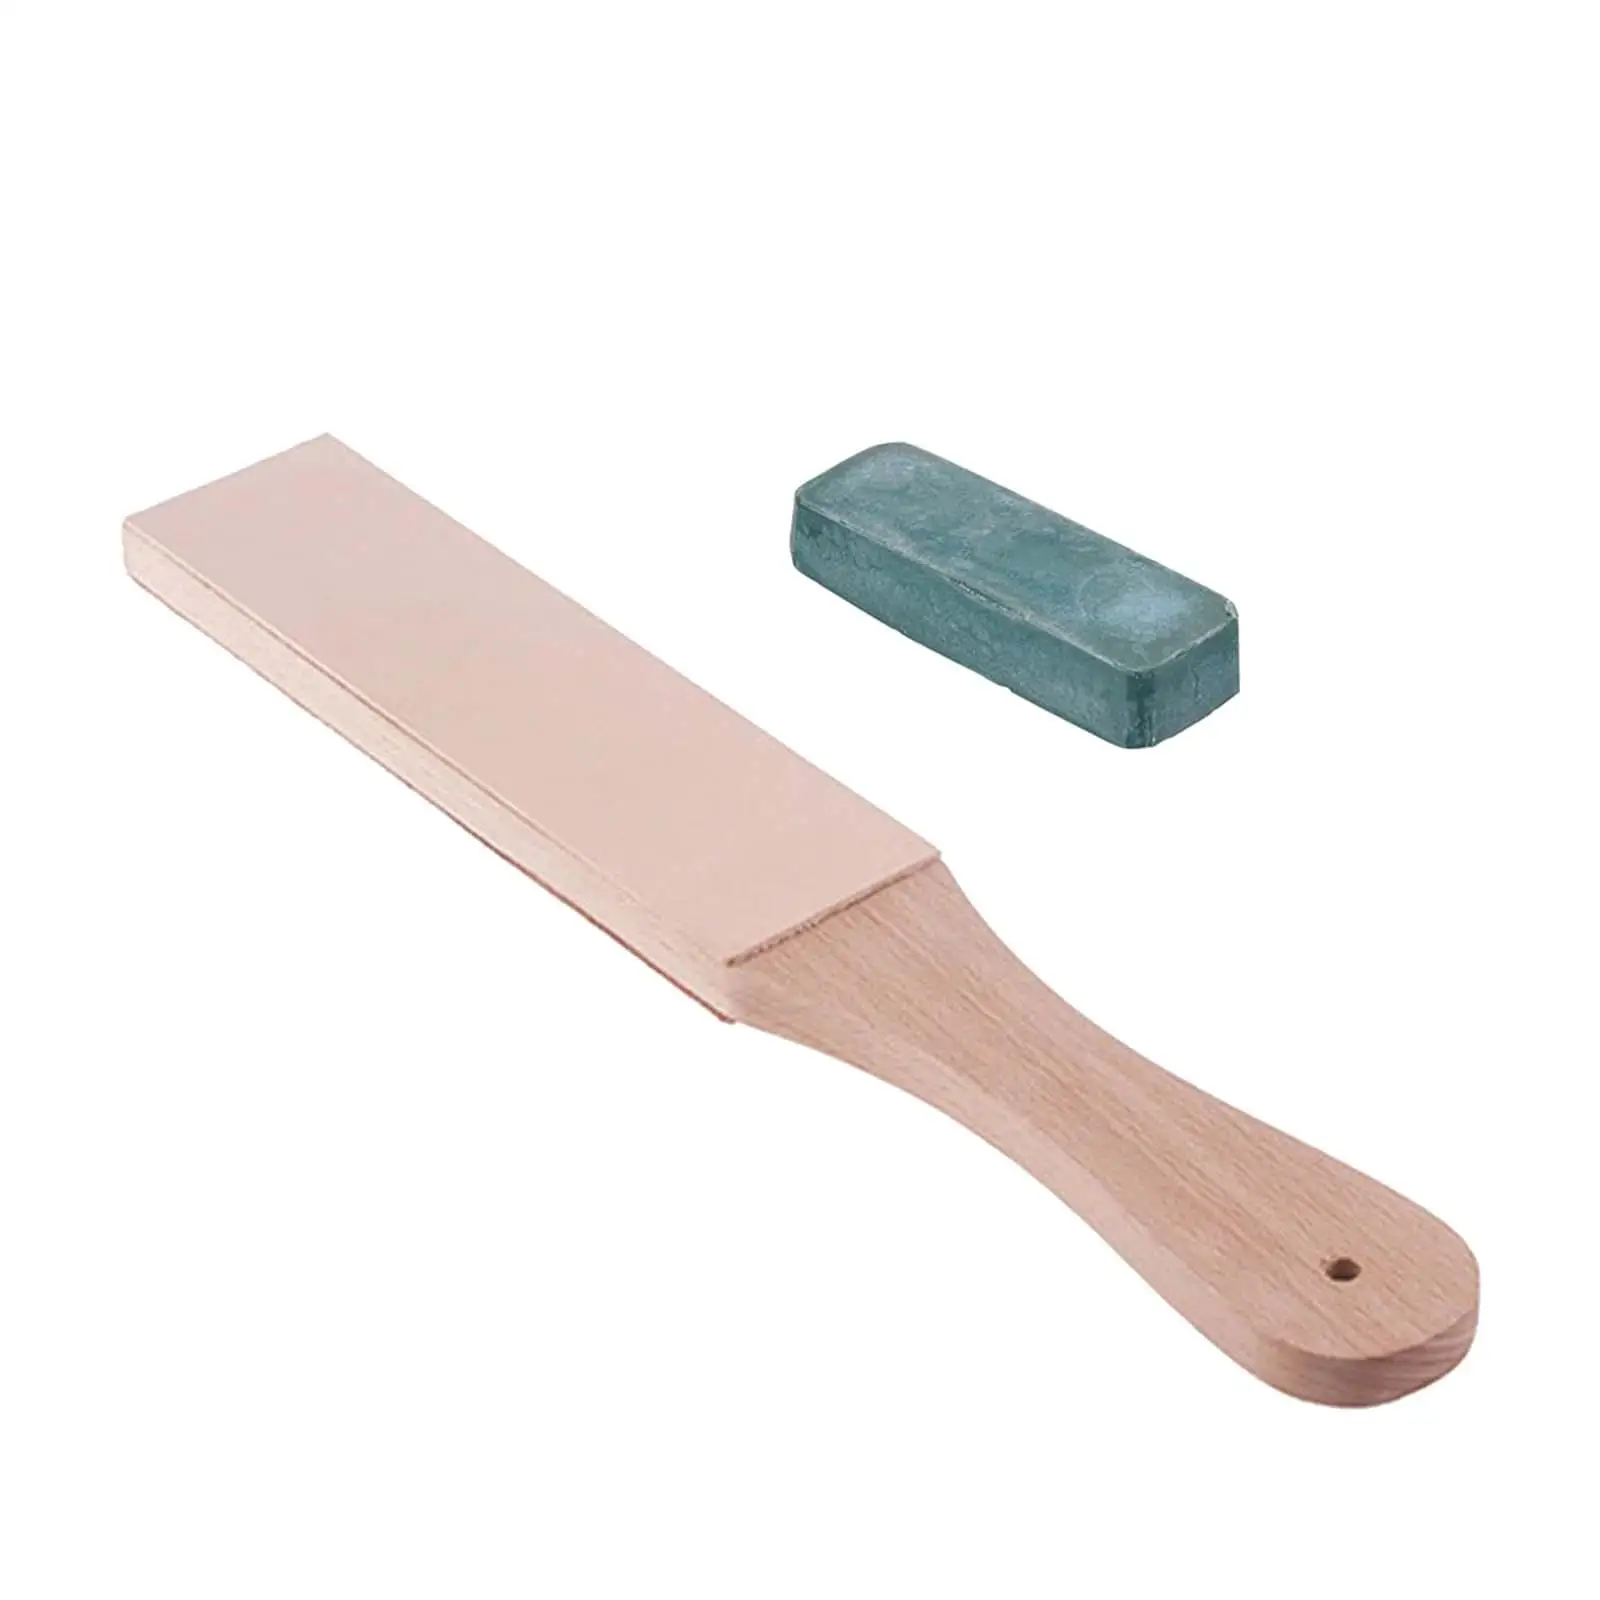 PU Leather Strop Kit with Handle Knife Strop PU Leather Stropping Kit Knife  Sharpener for Woodcarving Honing Woodworking - AliExpress